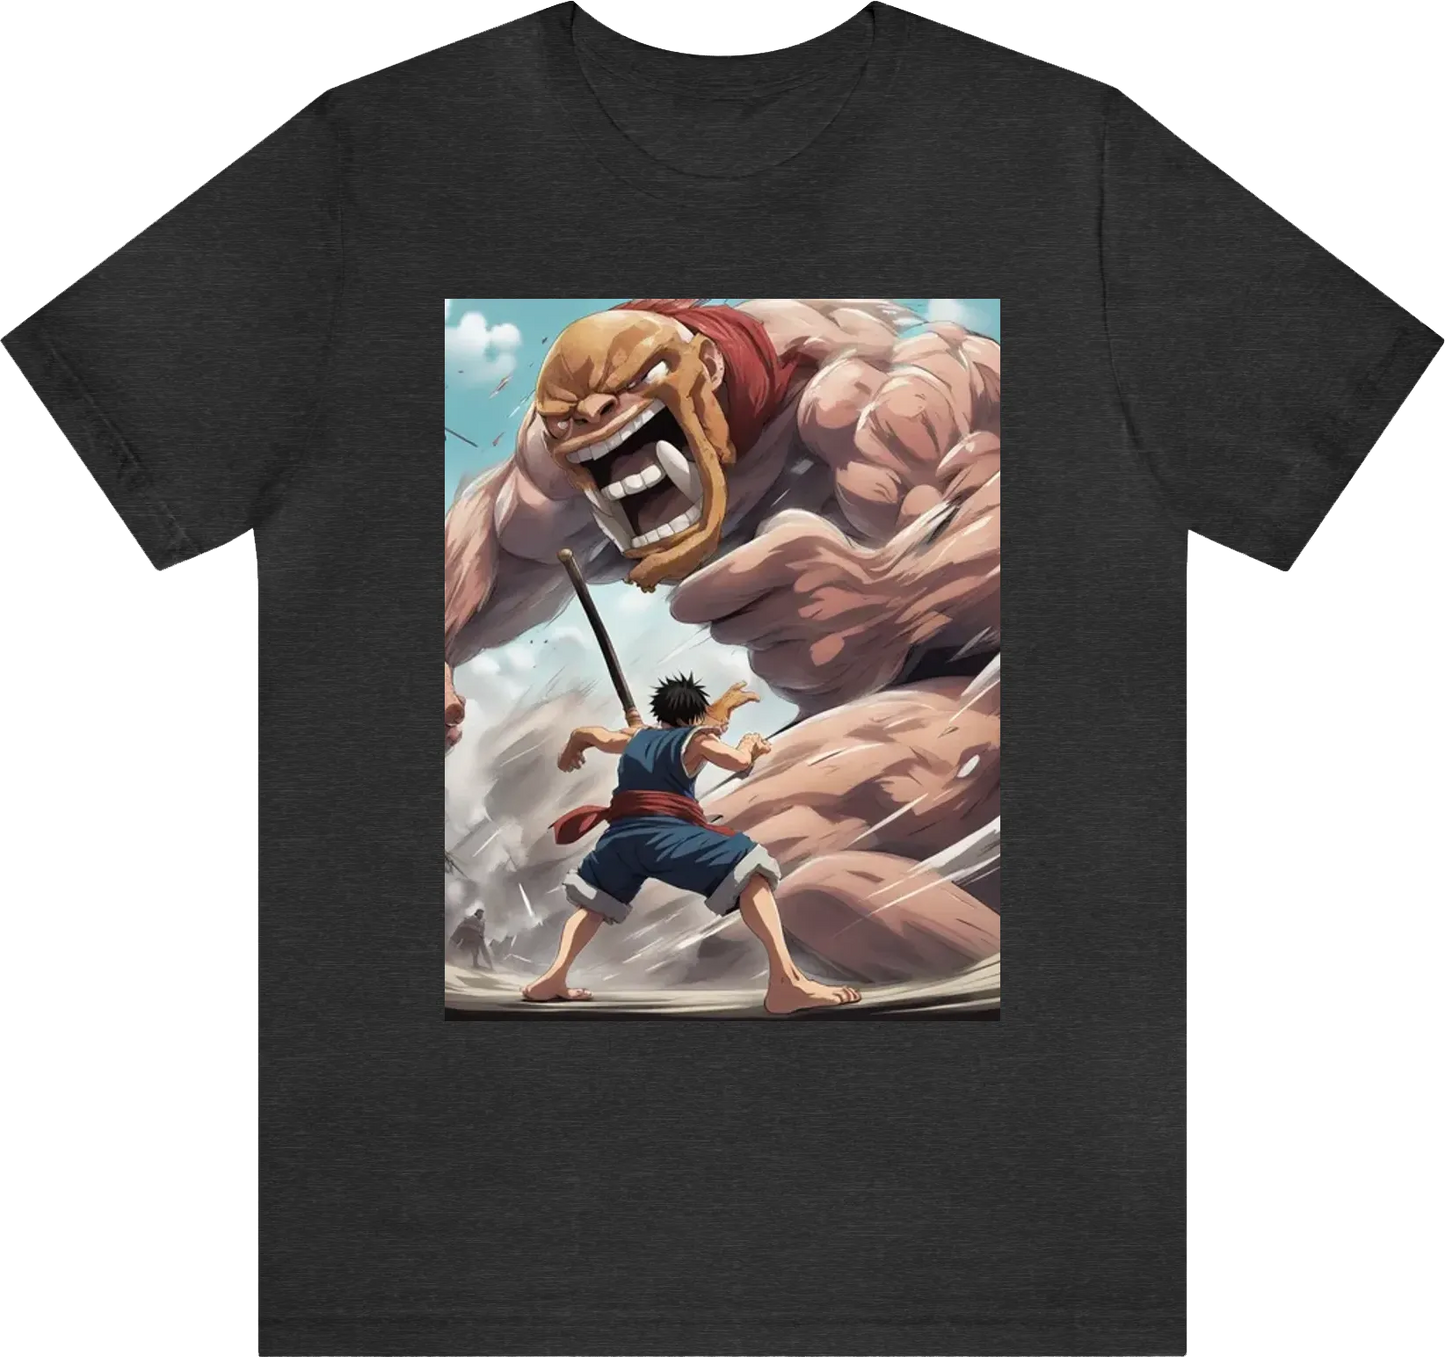 A small man fighting a giant man, hi-def anime one piece style.